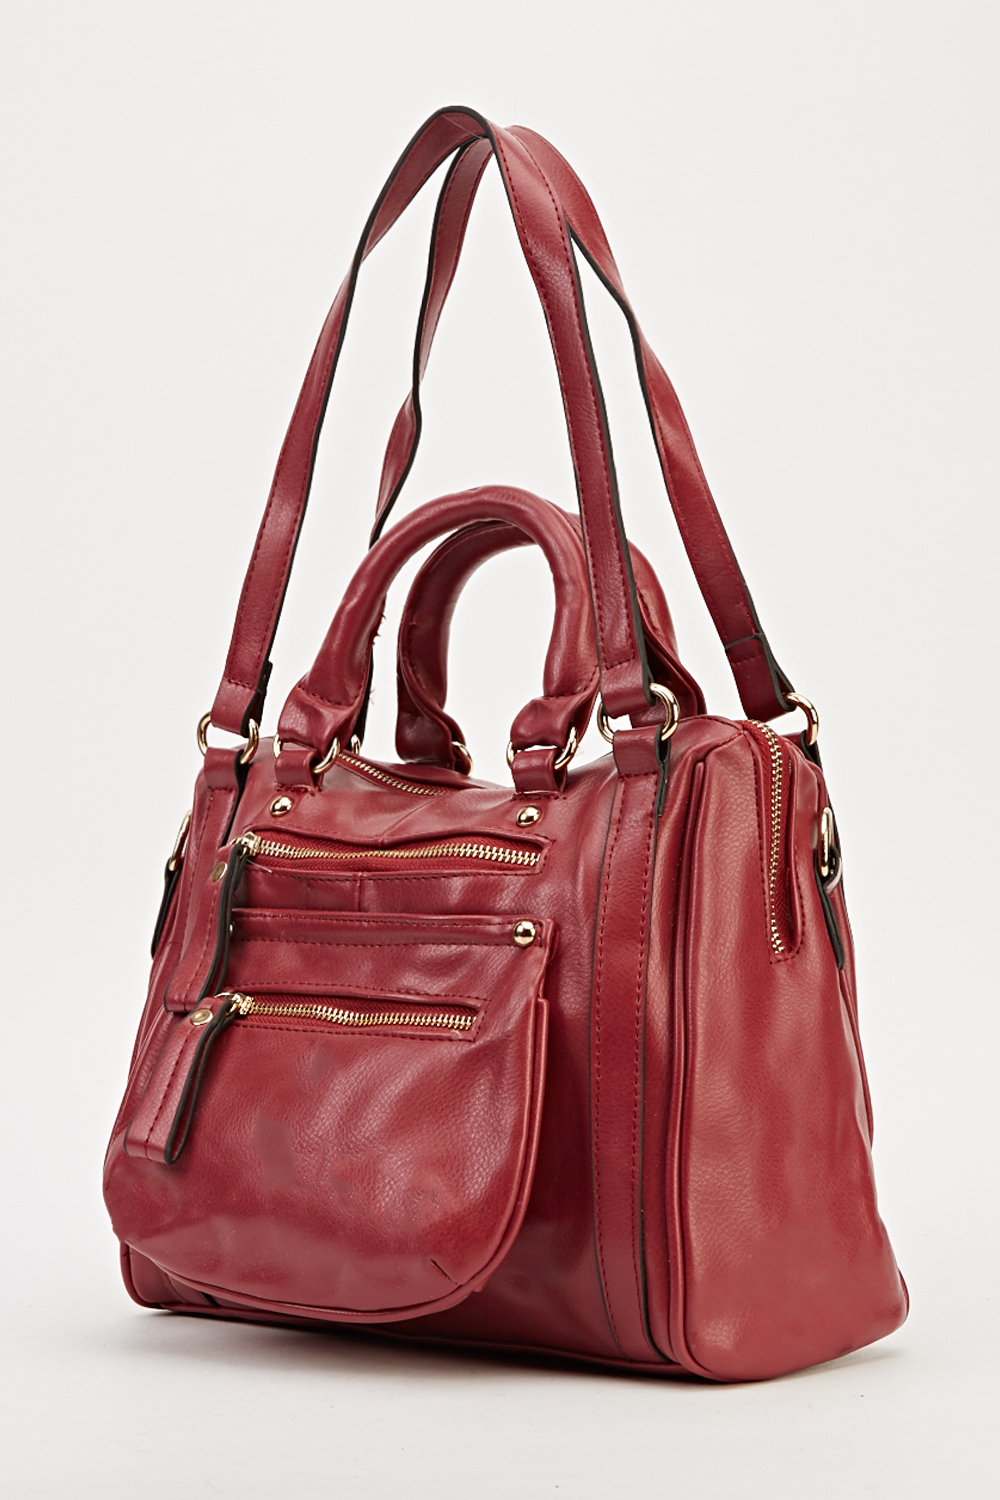 Multi Zip Faux Leather Wine Bag - Just $7